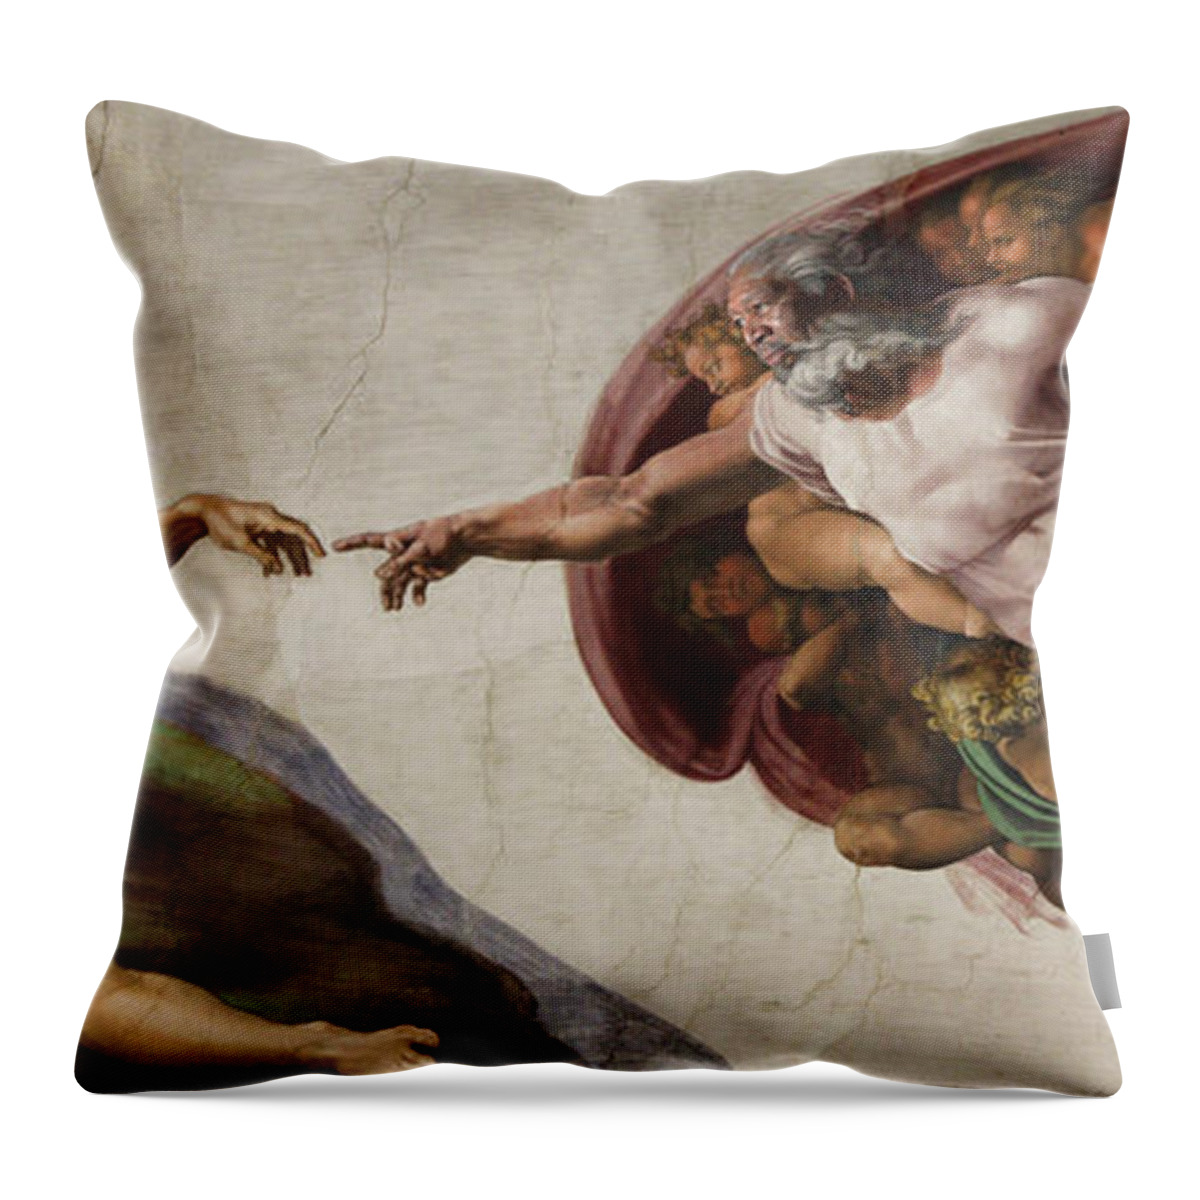 Tom Cruise Throw Pillow featuring the digital art Scientology Explained by Rick Mosher